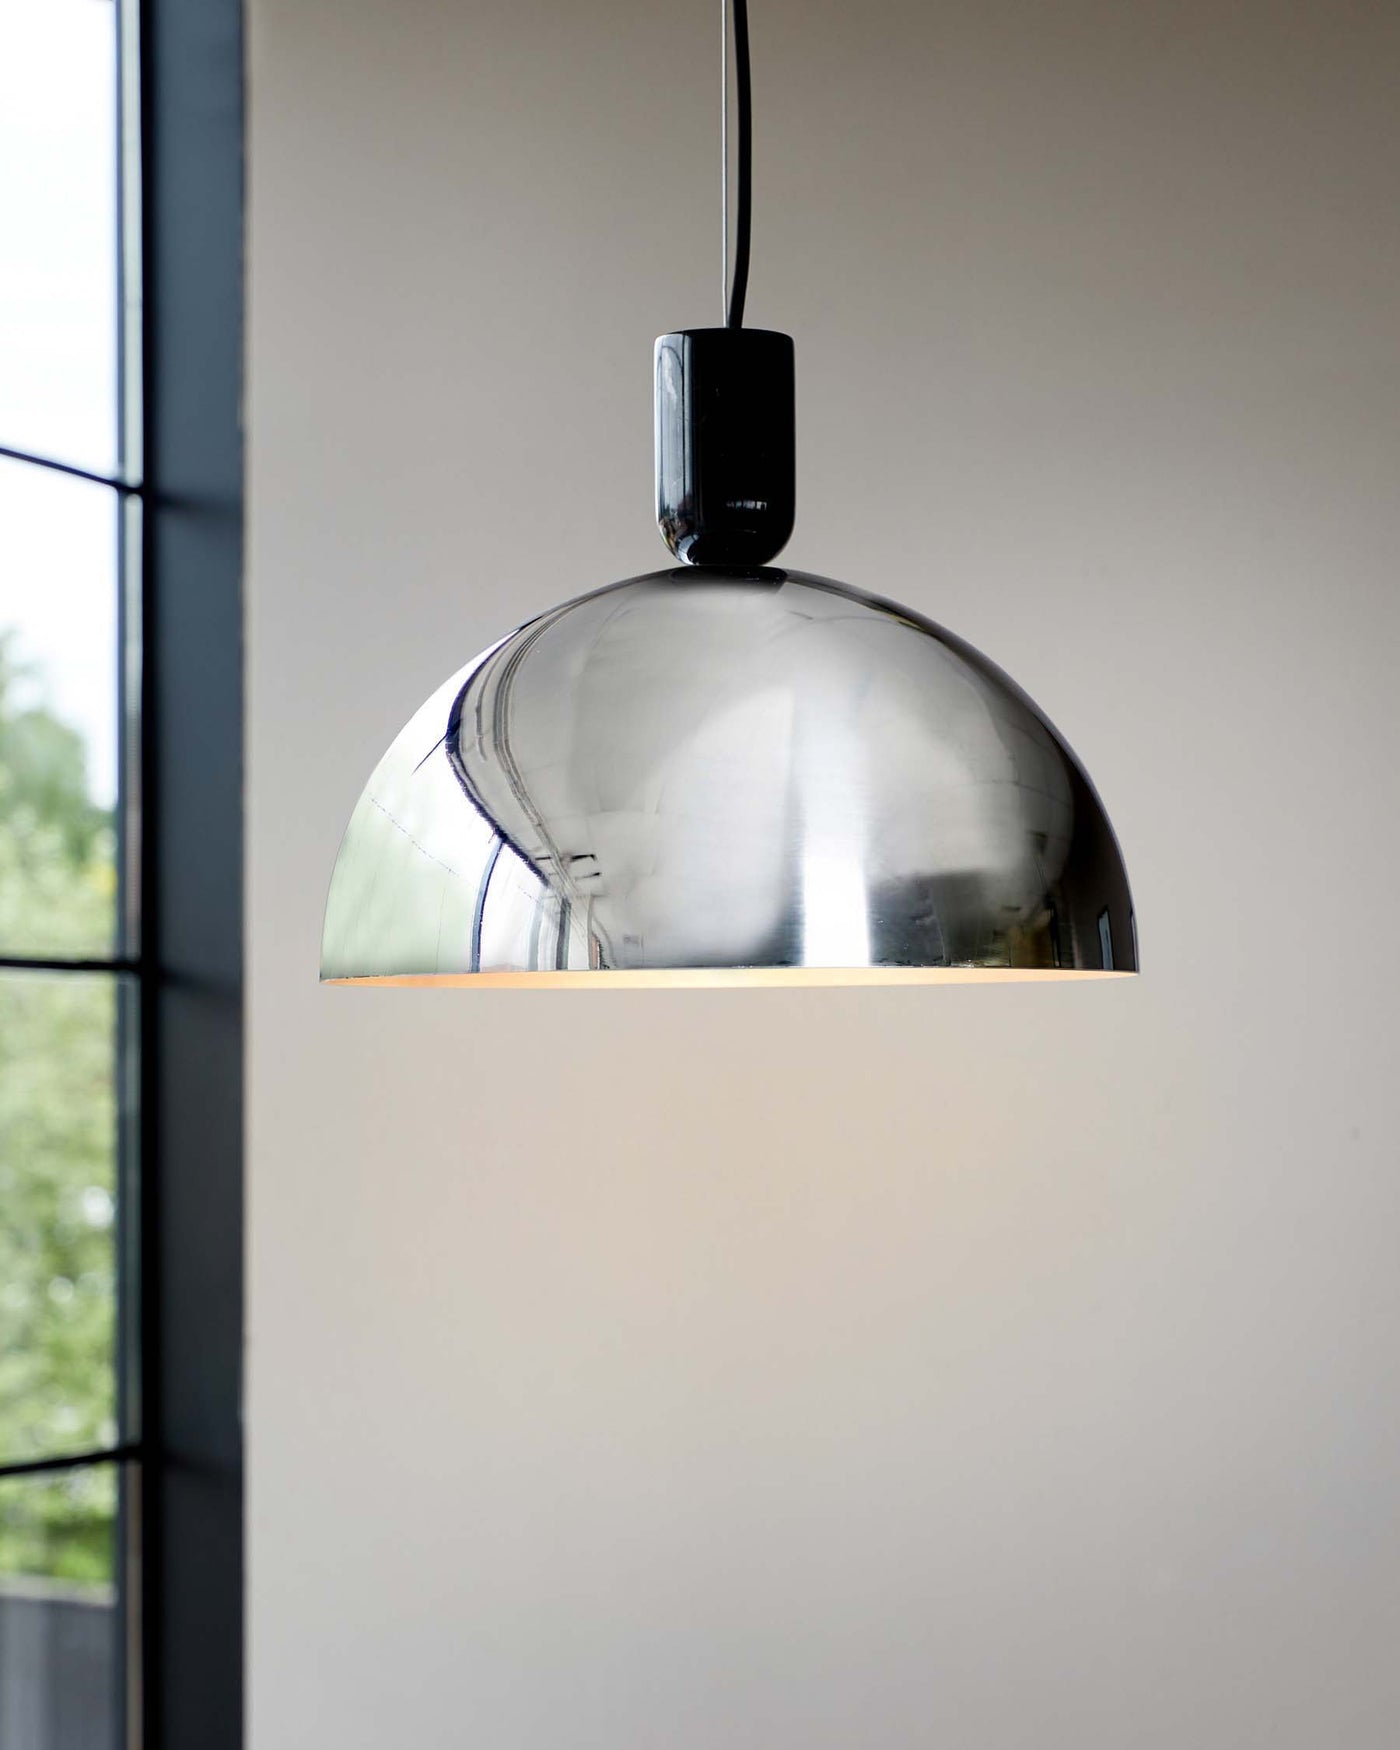 Modern chrome pendant light with a sleek, reflective dome-shaped shade, suspended from a black cable. The fixture is set against a soft neutral background with natural light coming through a window to the side.